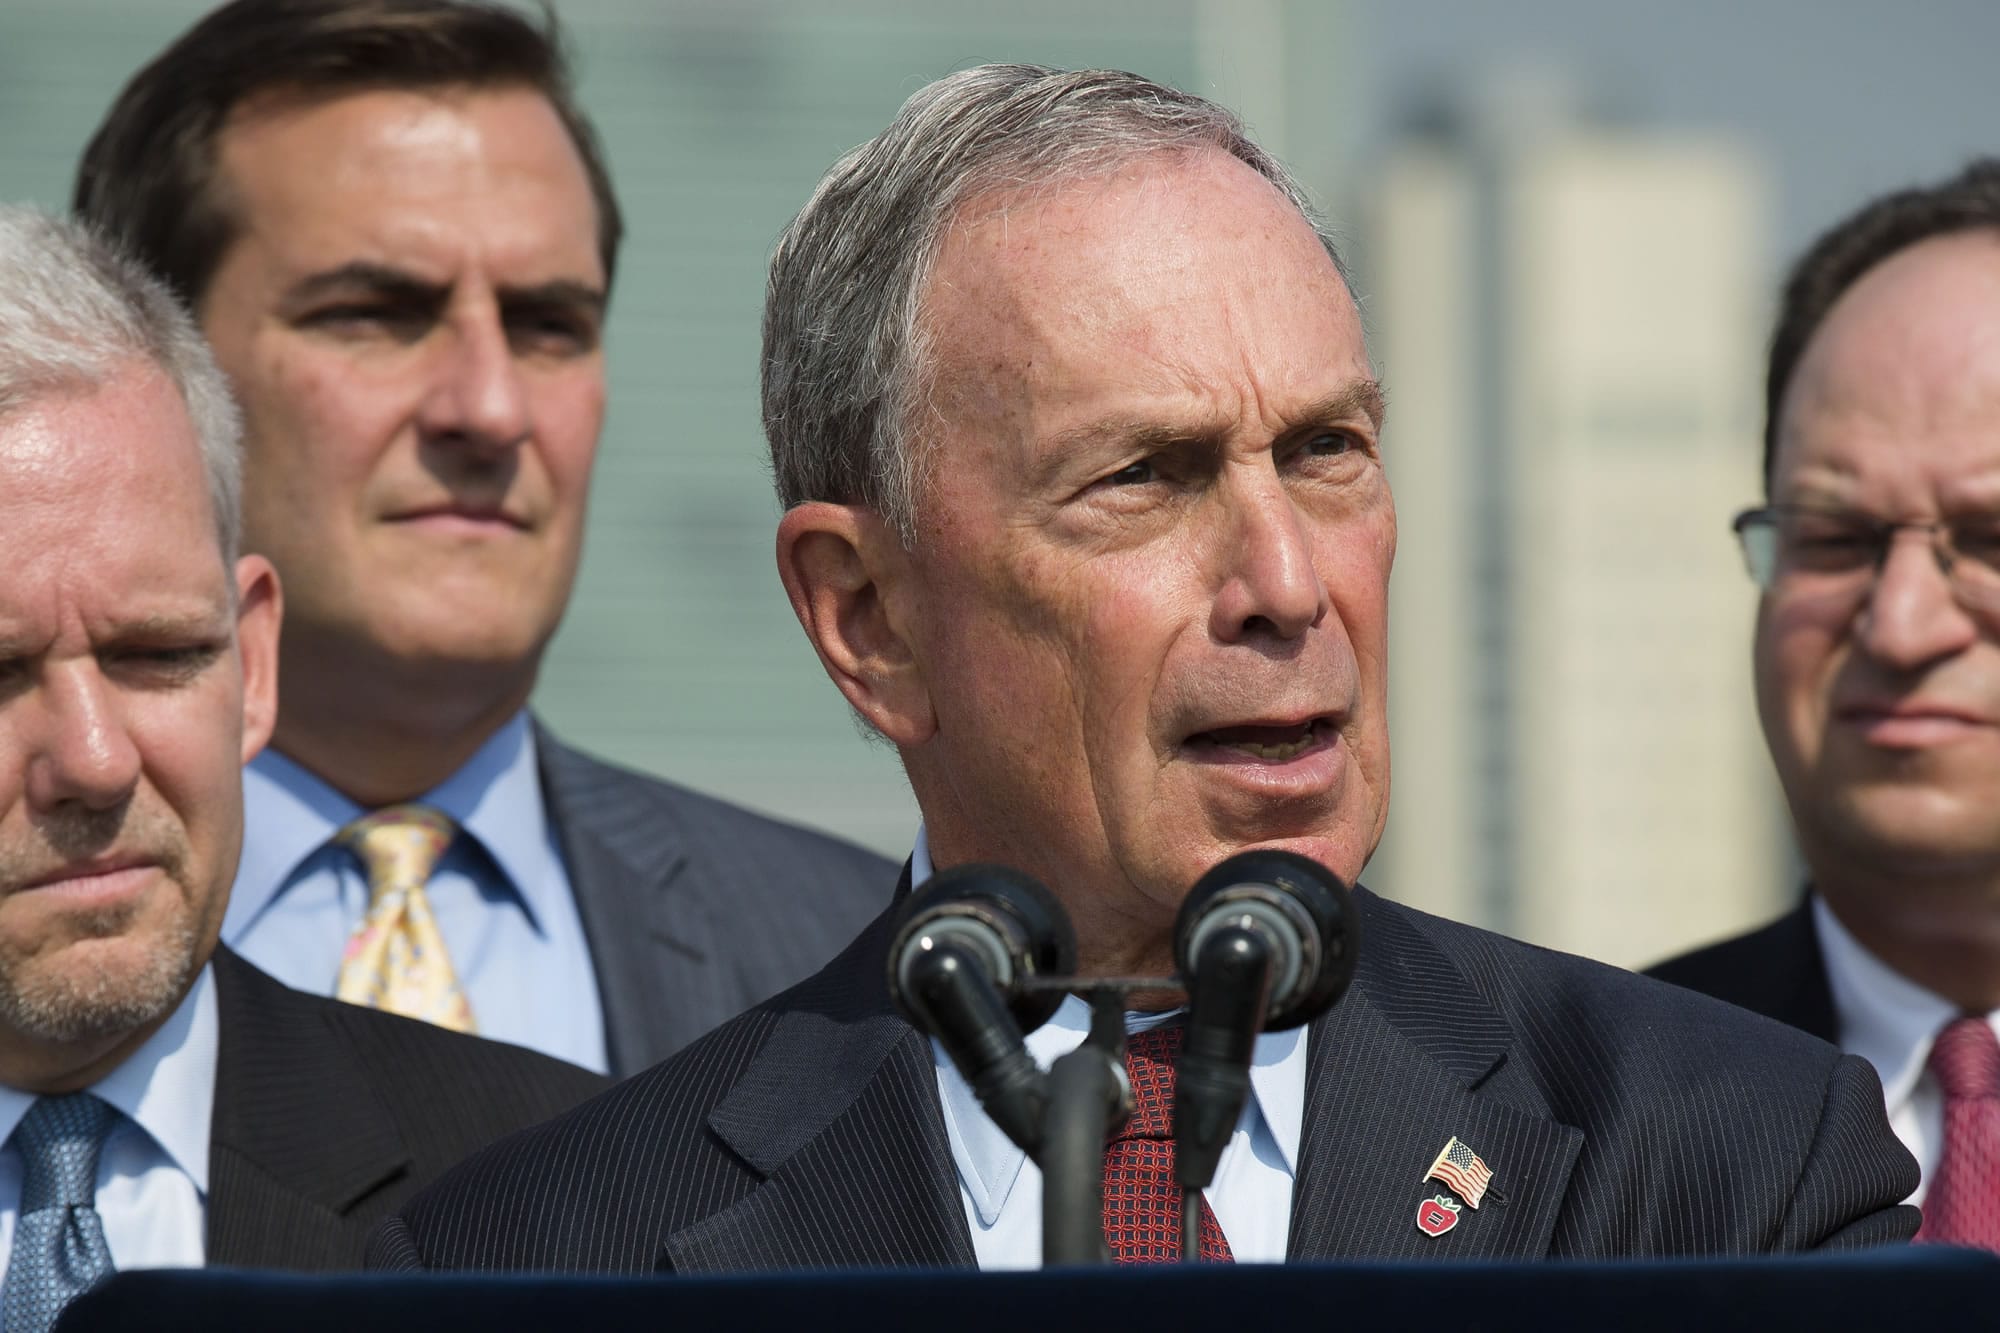 New York City Mayor Michael Bloomberg speaks to the media during a news conference after officially opening the new Hunter's Point South Waterfront Park on Wednesday in the Queens borough of New York.